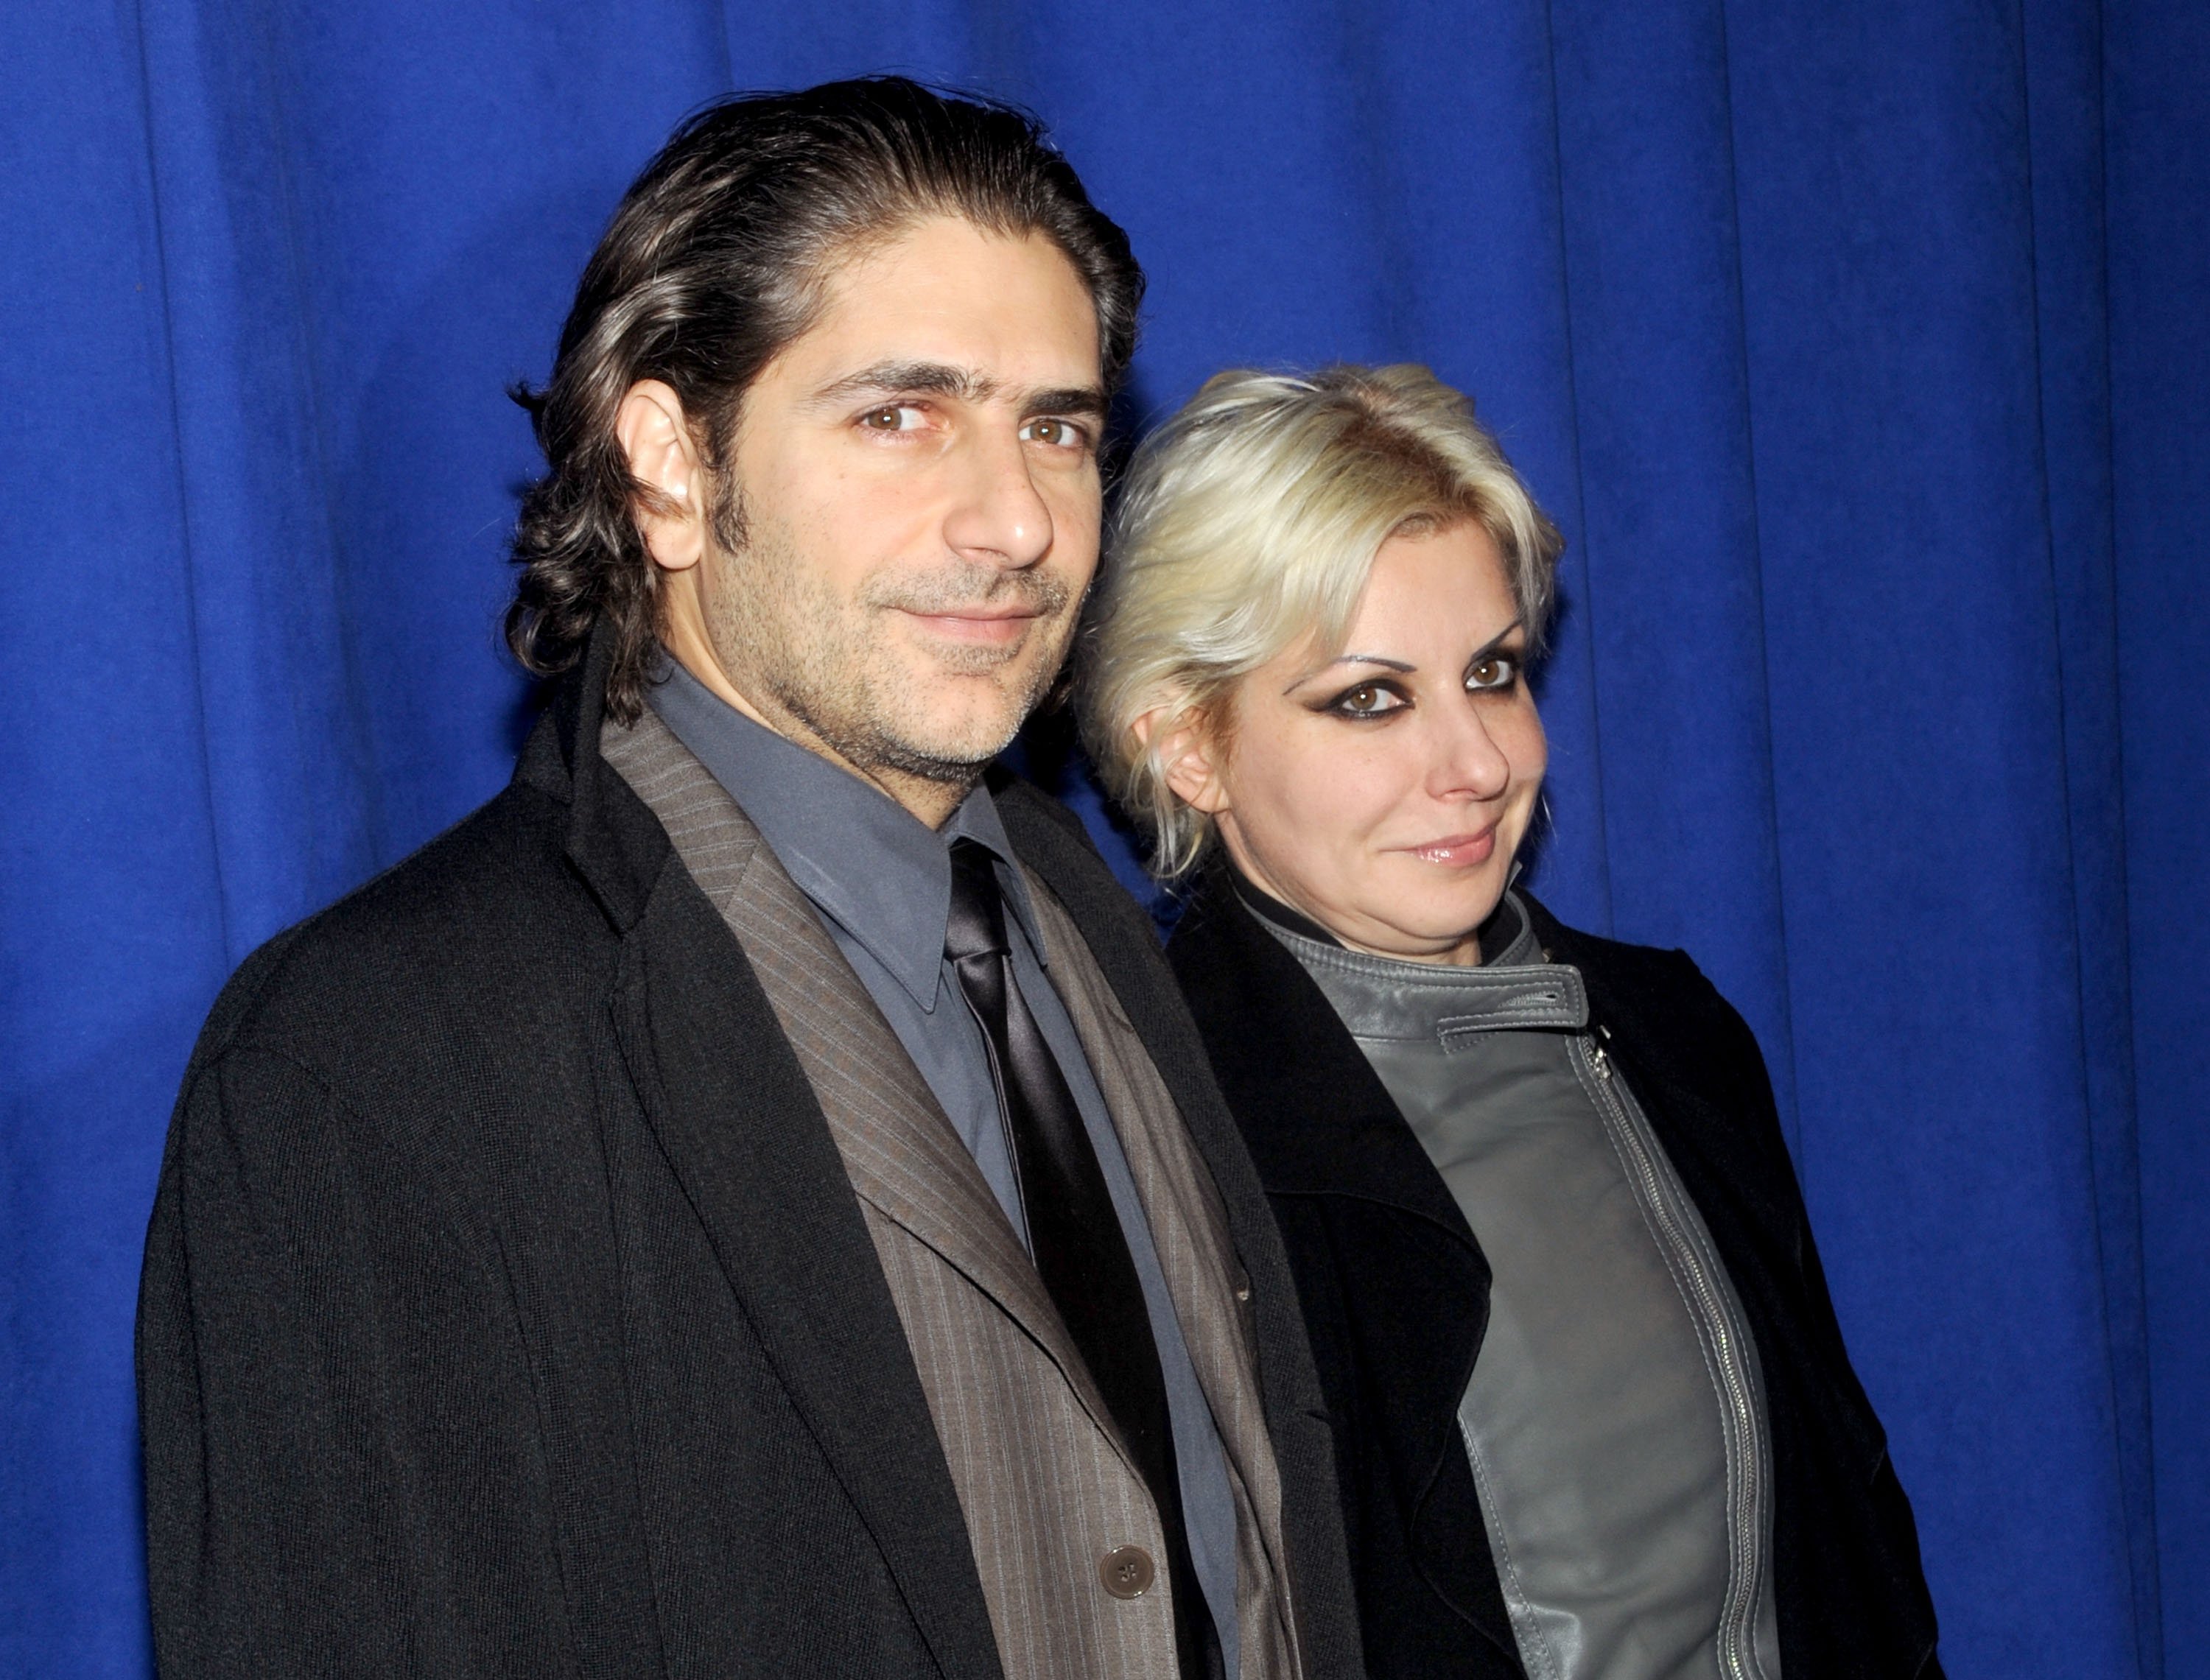 Michael Imperioli and his wife, Victoria Chlebowski attend the 7th annual Safe at Home Gala on November 13, 2009 in New York City. | Source: Getty Images